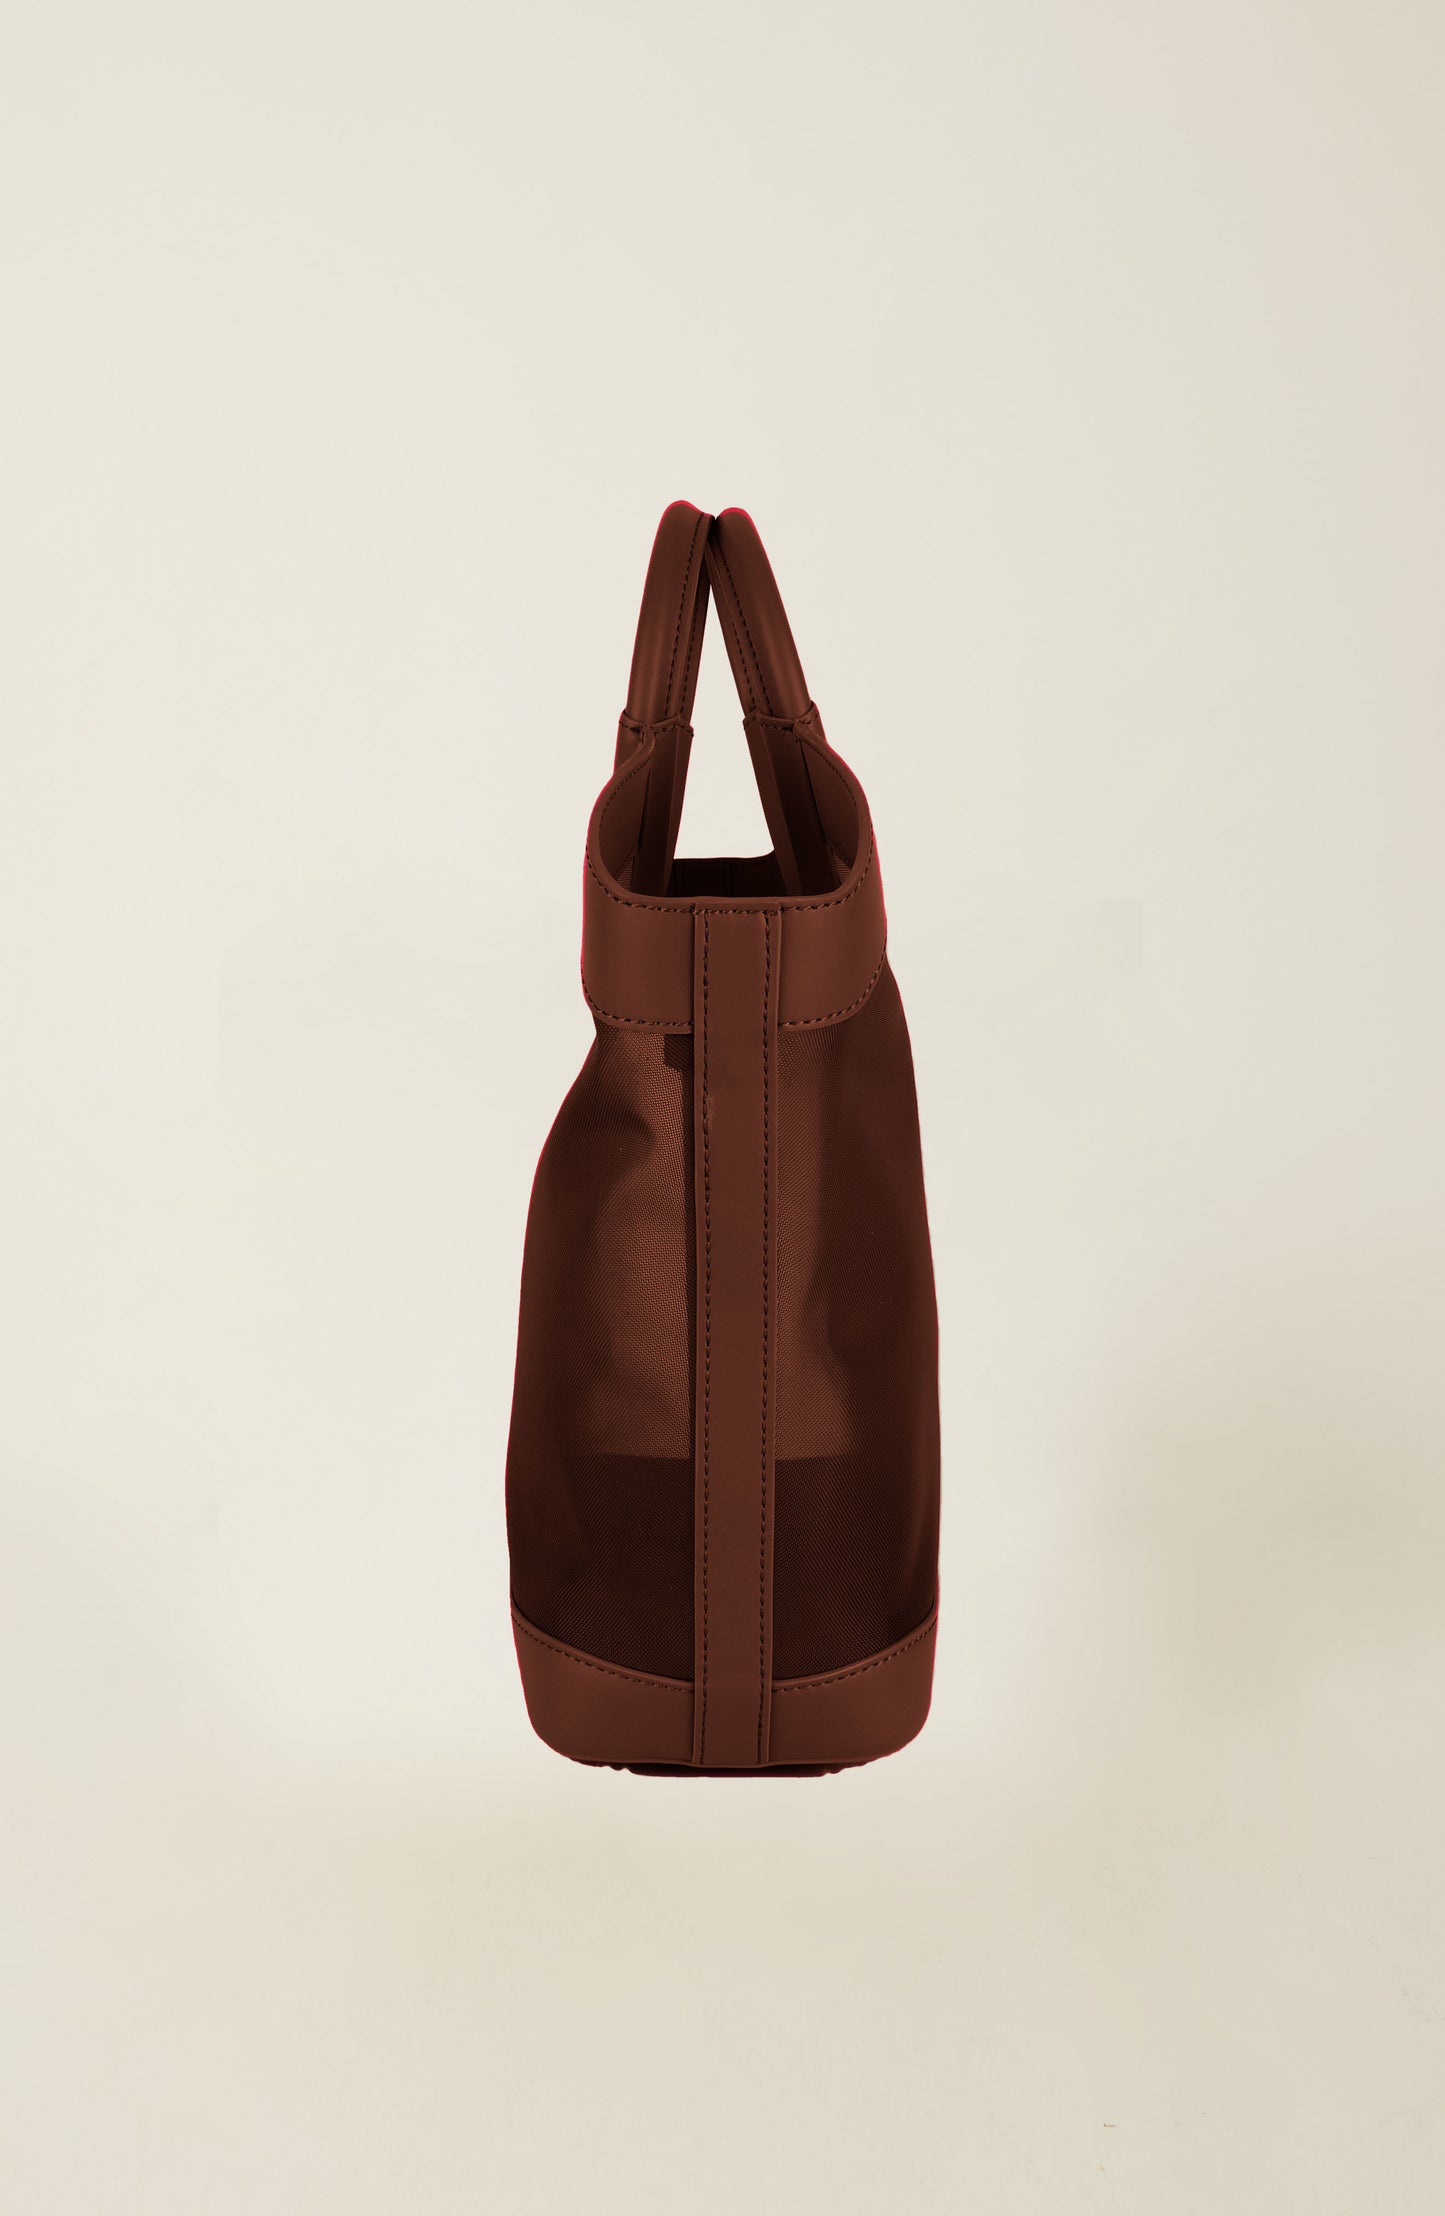 Tory Tote Chocolate PRE-ORDER SHIPS 6/1 -6/30